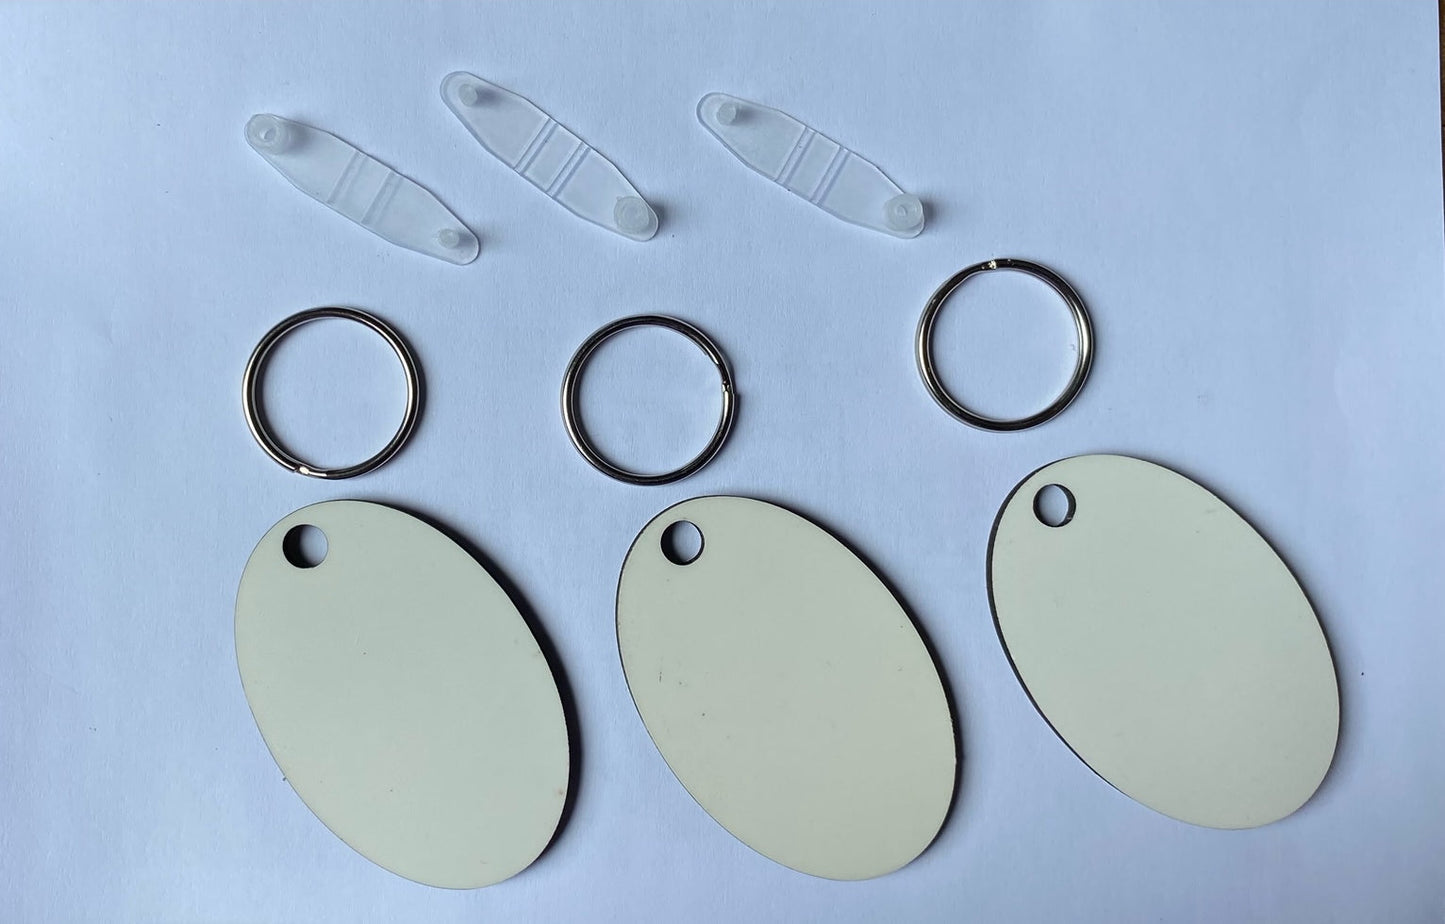 50 x Blank Sublimation MDF Keyrings 6cm x 4cm Double Sided Oval